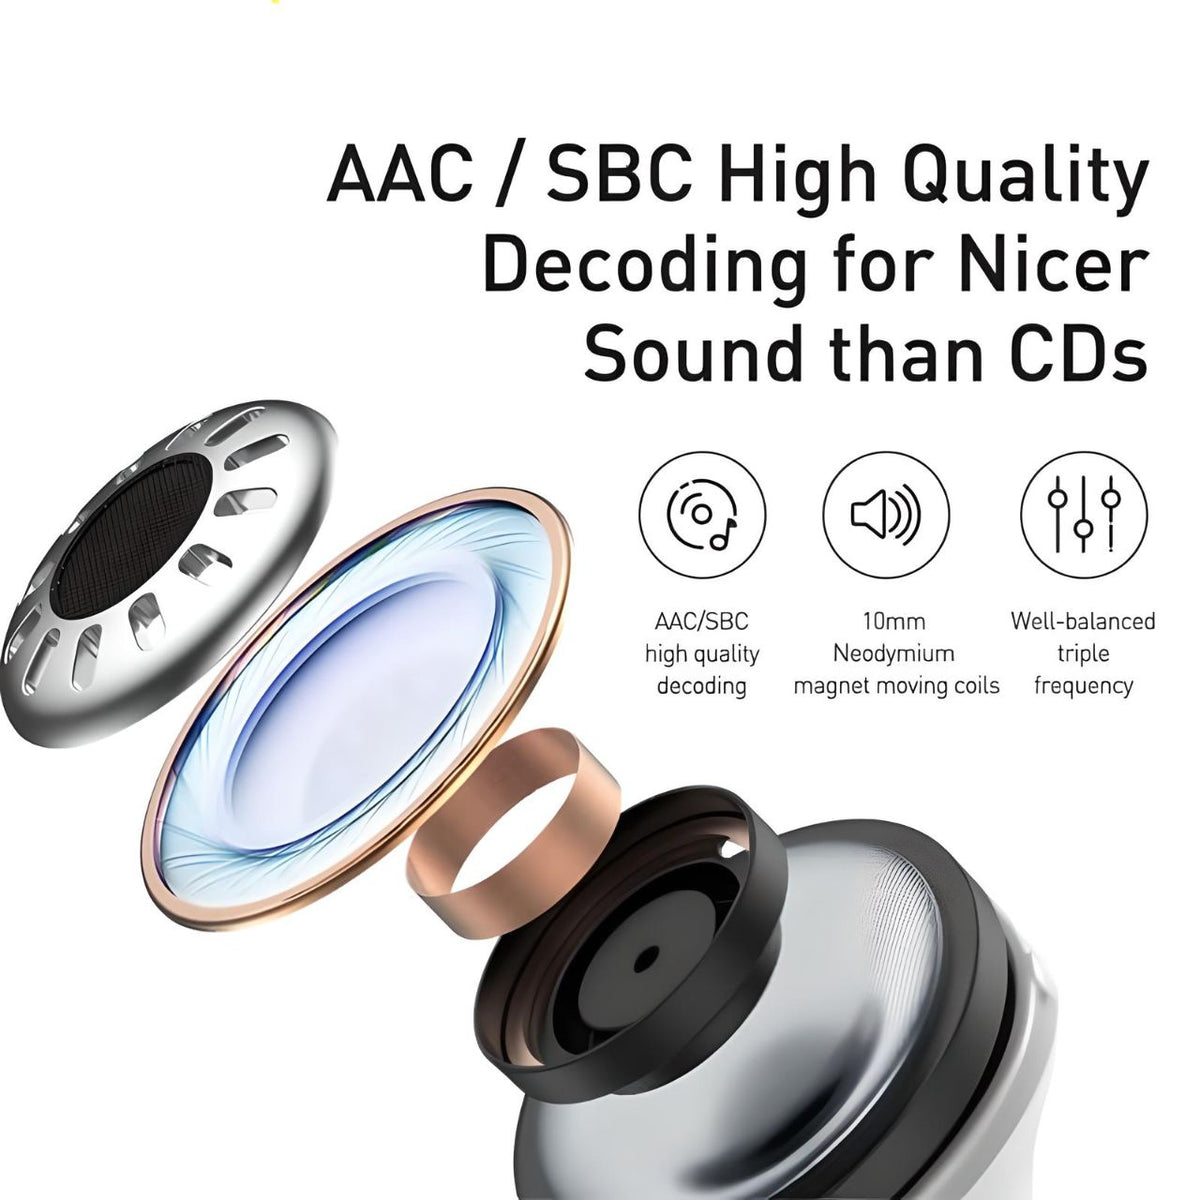 Premium Noise Cancelling Wireless Earbuds Dual Monaural Switching Low Latency Waterproof Sound - activated BT 5.1 YOLO Yard